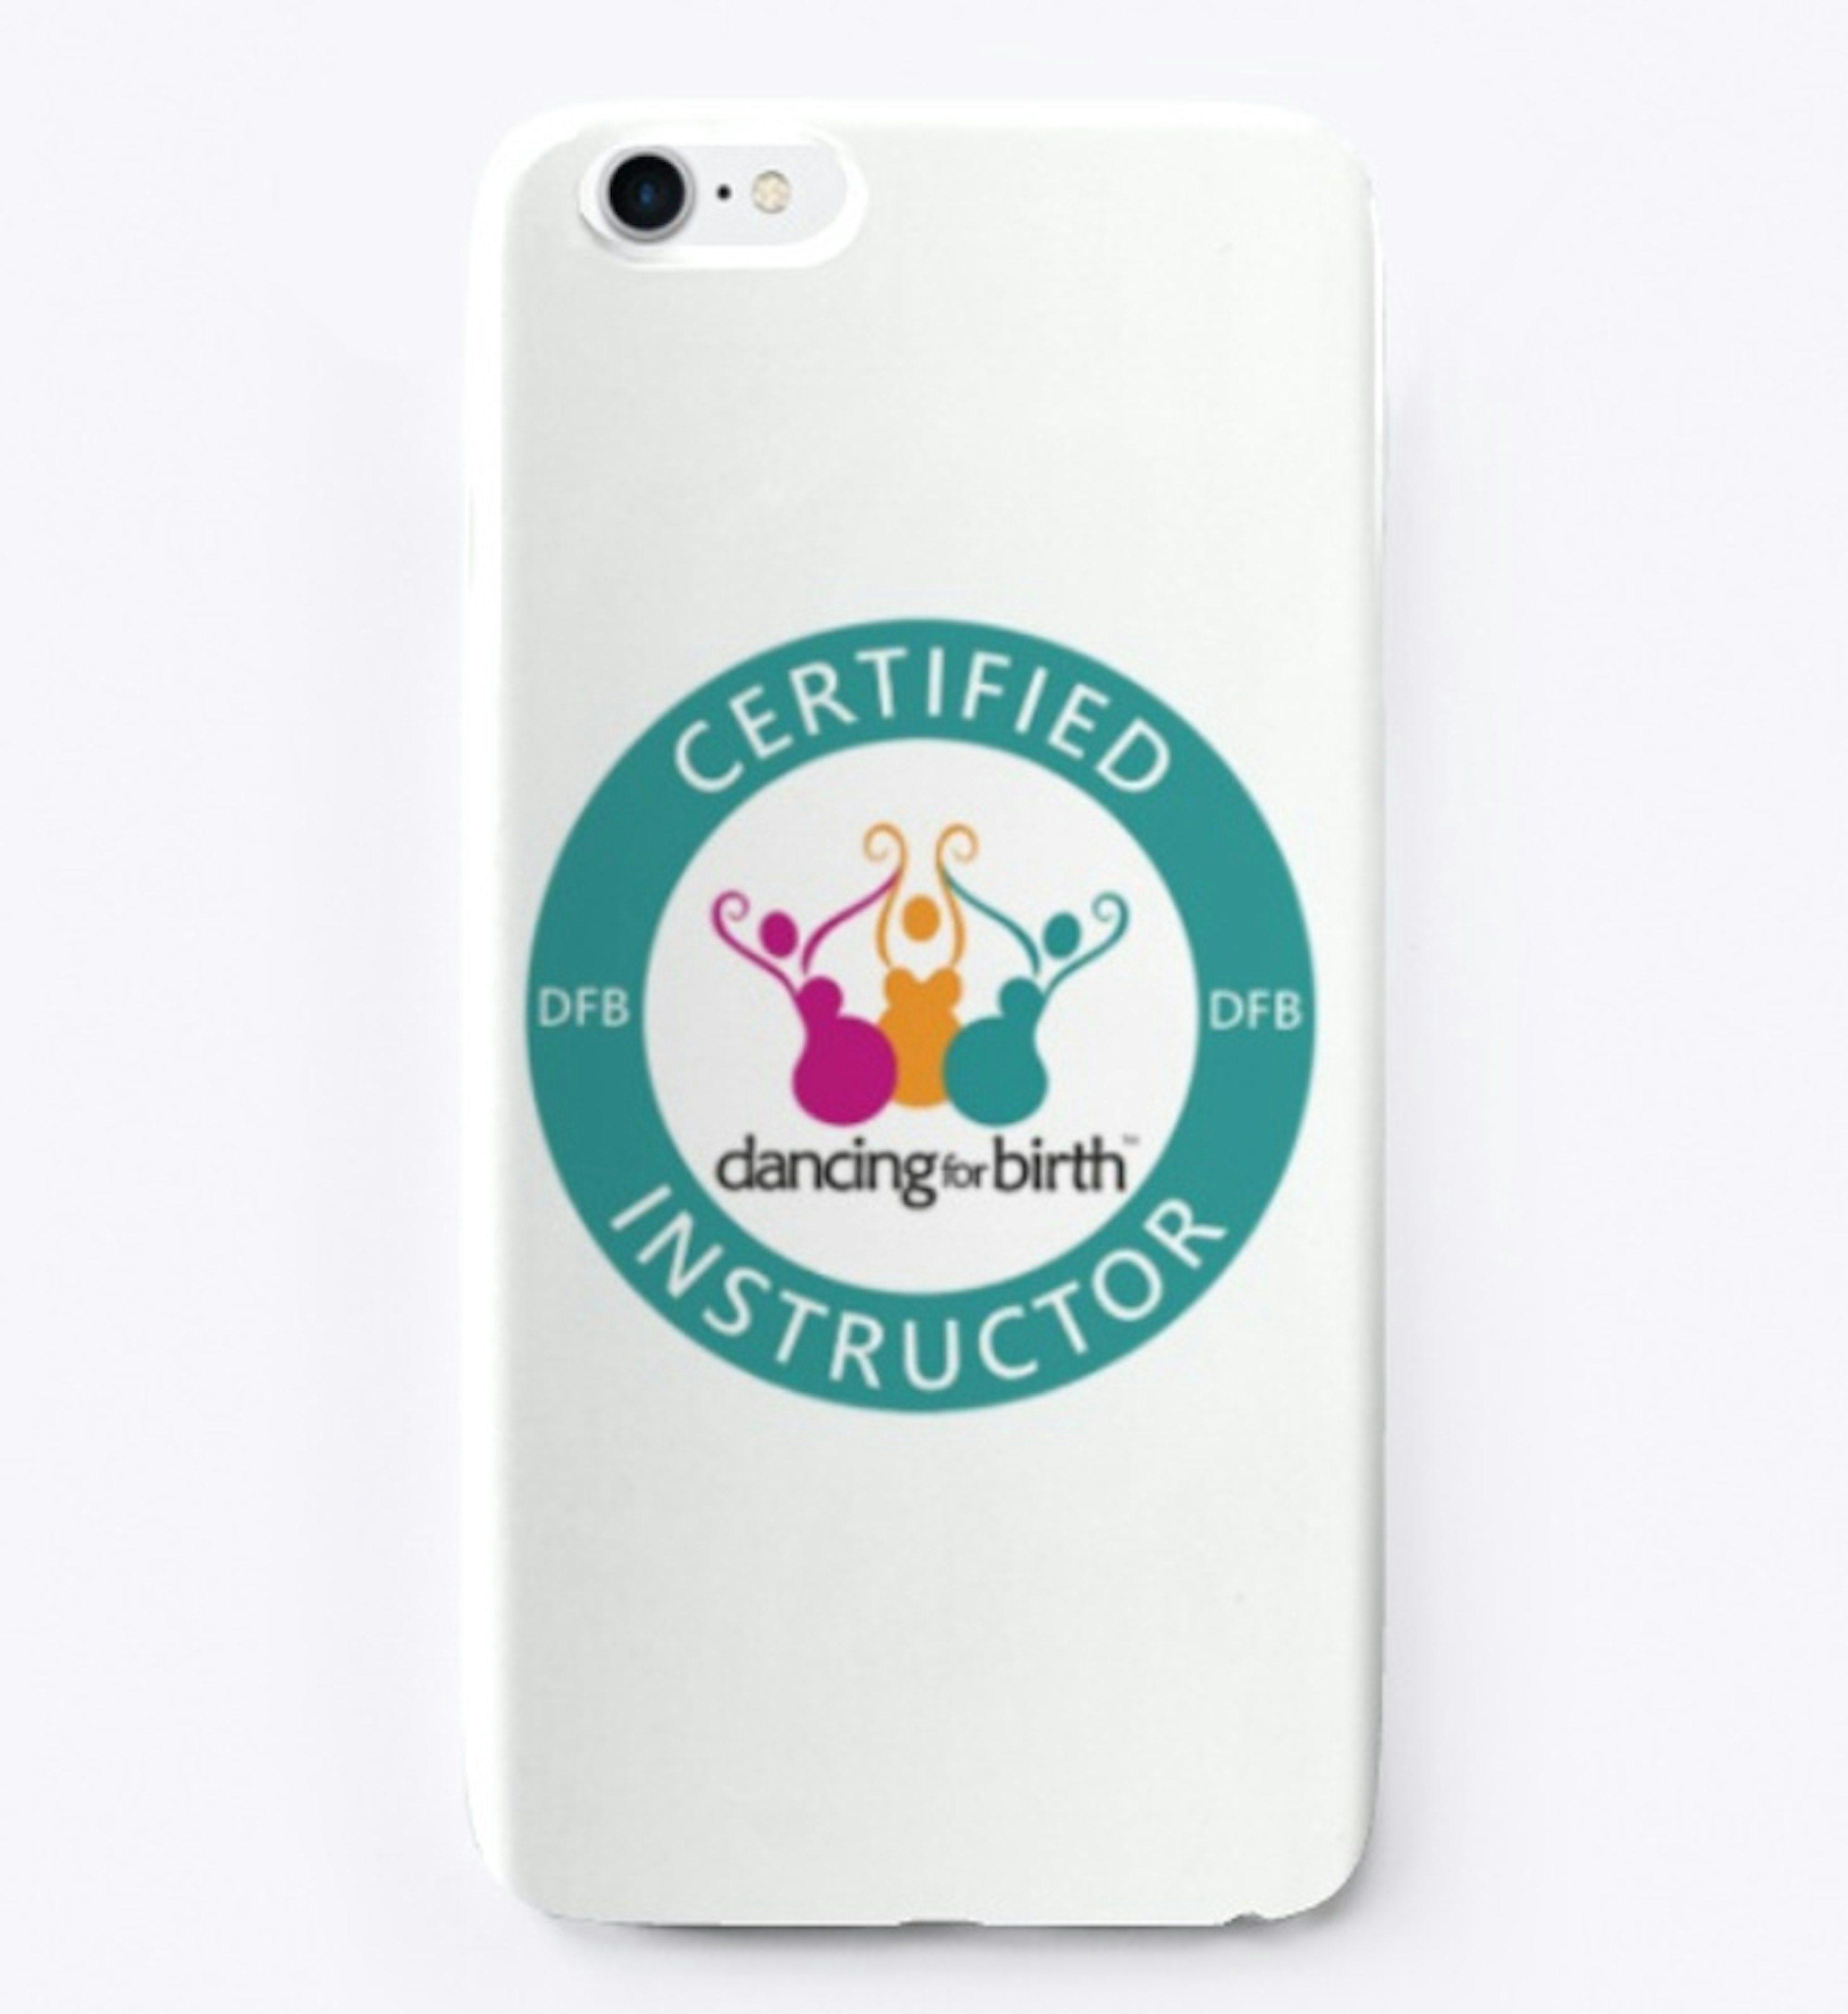 Phone Case for DFB Certified Instructors